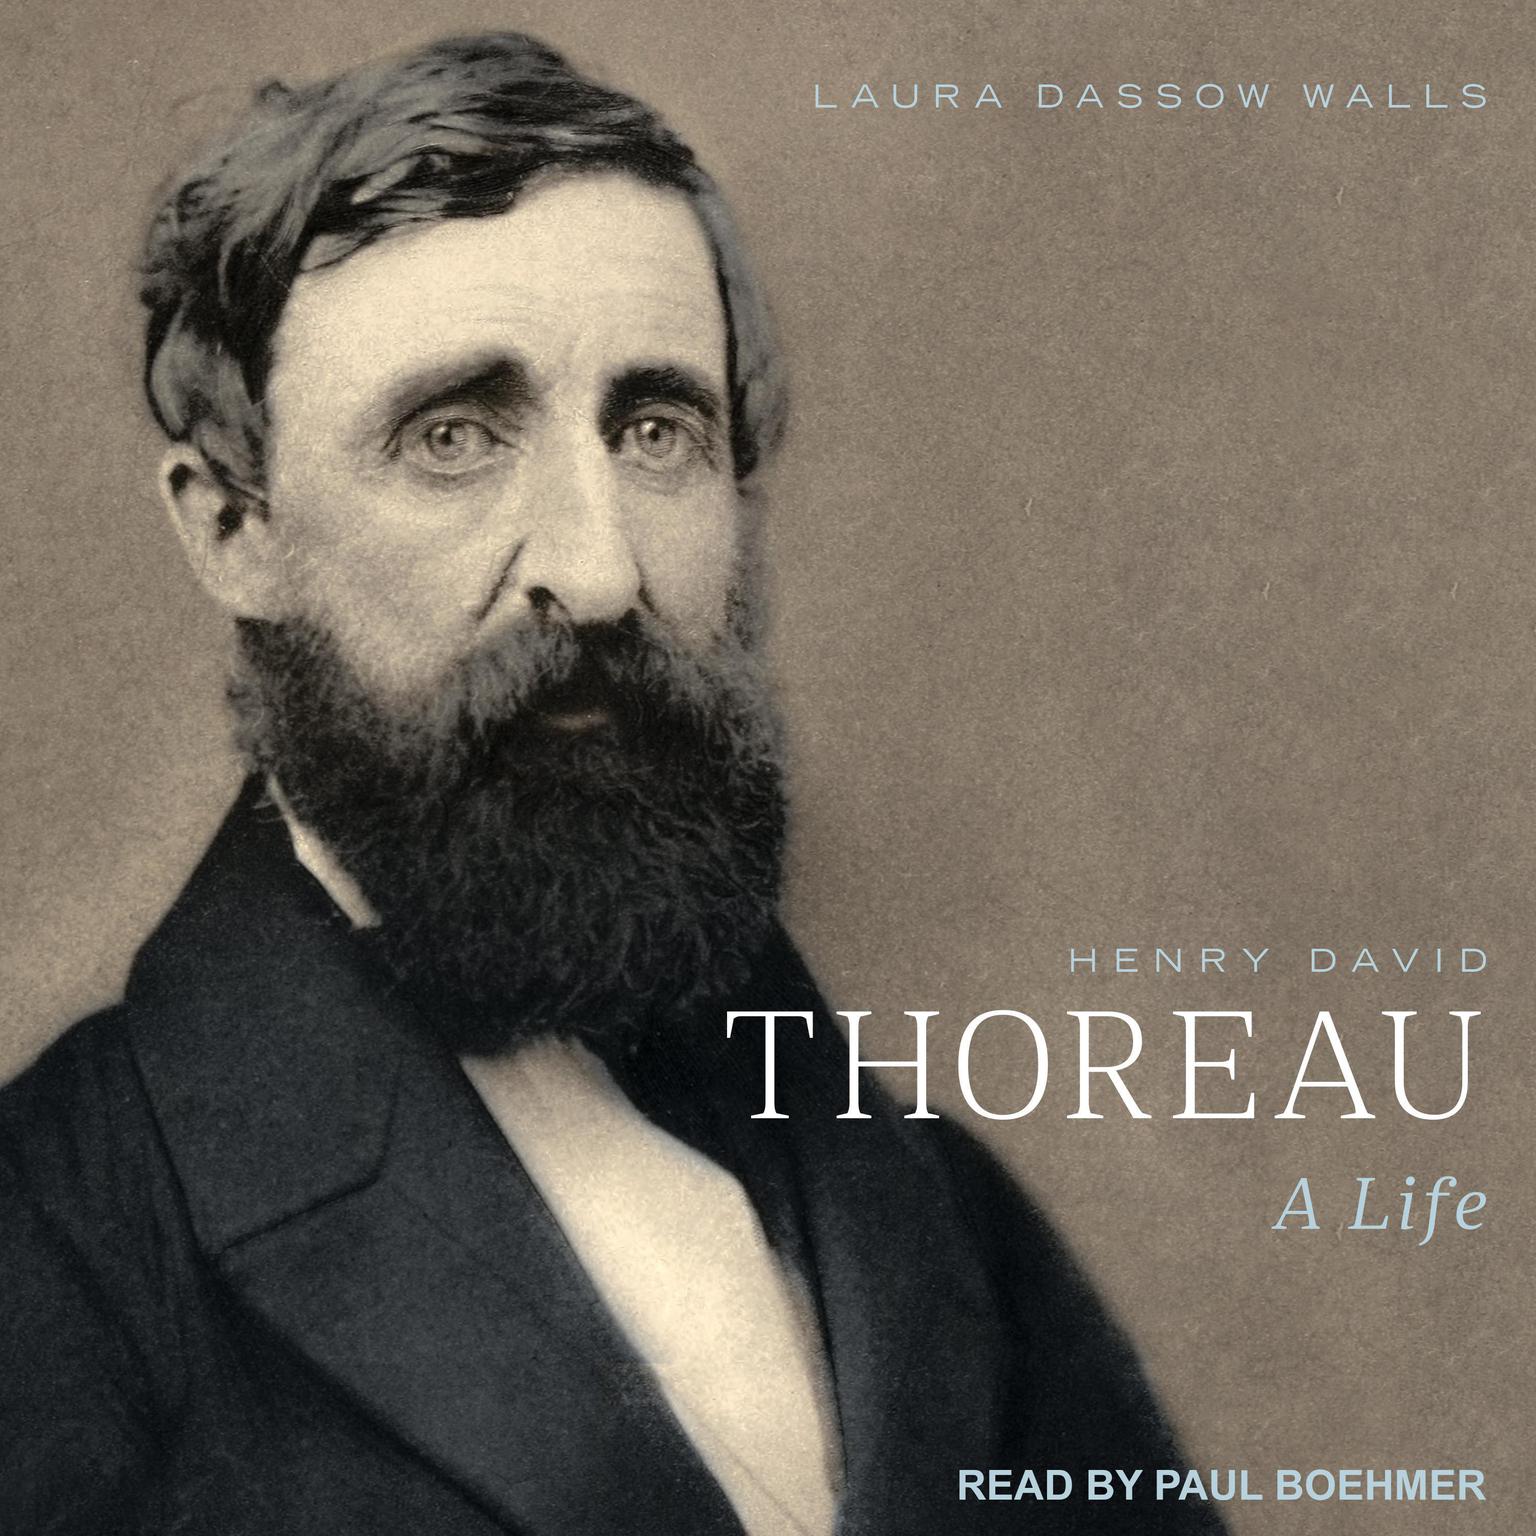 Henry David Thoreau: A Life Audiobook, by Laura Dassow Walls